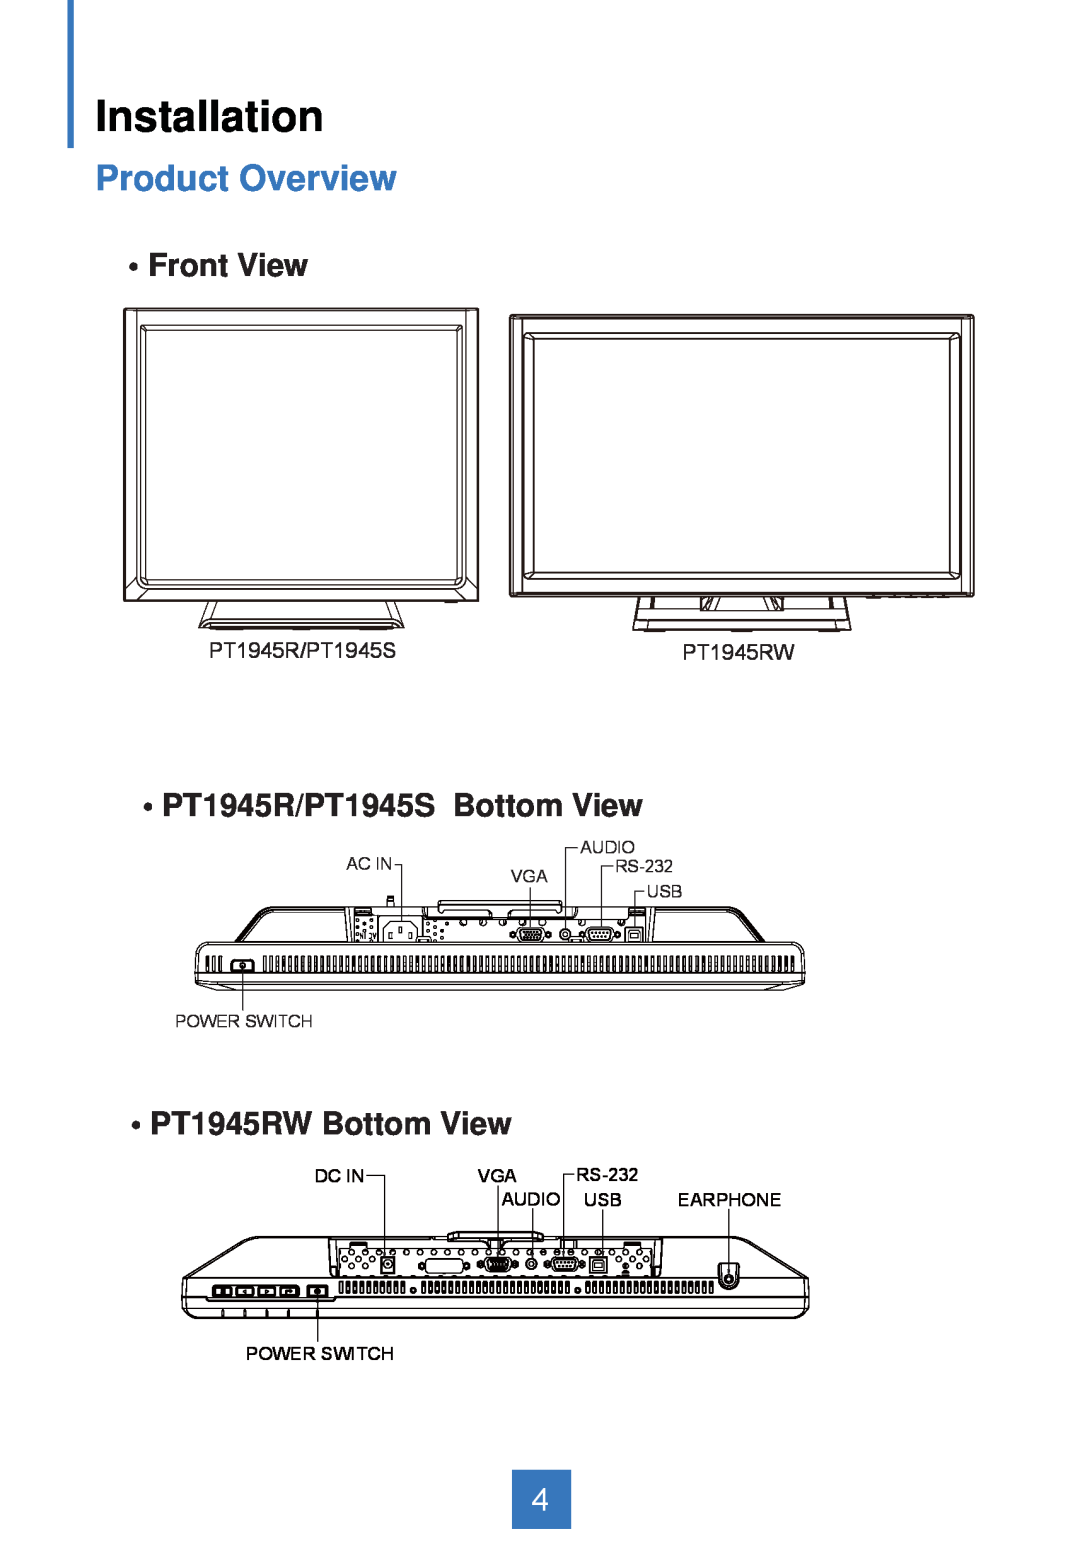 Planar Installation, Product Overview, Front View, PT1945R/PT1945S Bottom View, PT1945RW Bottom View, Ac In, Audio 